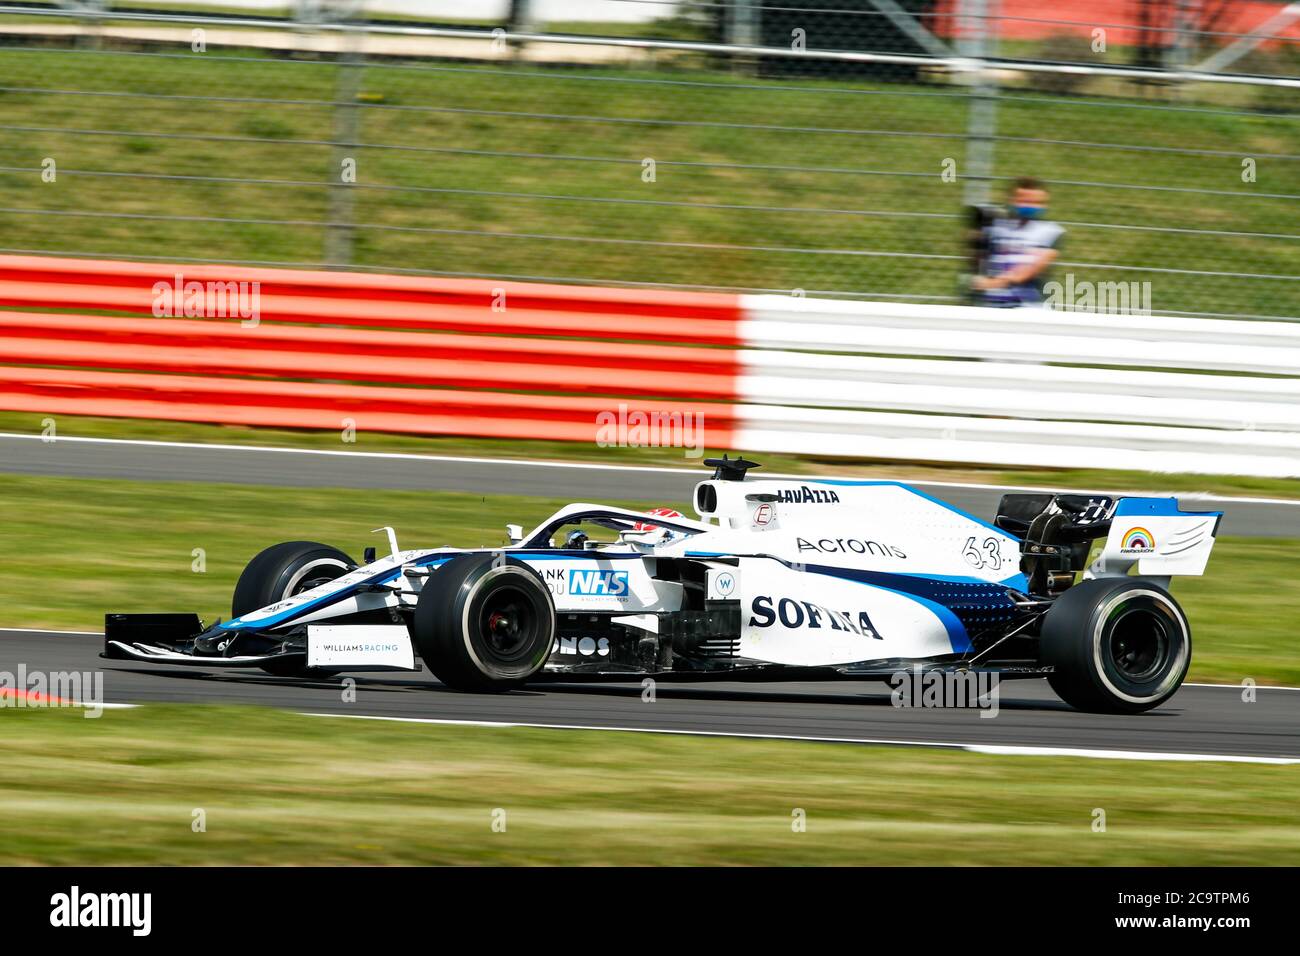 George Russell of Williams Racing during the 2020 British Grand Prix at Silverstone, Northamptonshire. Stock Photo